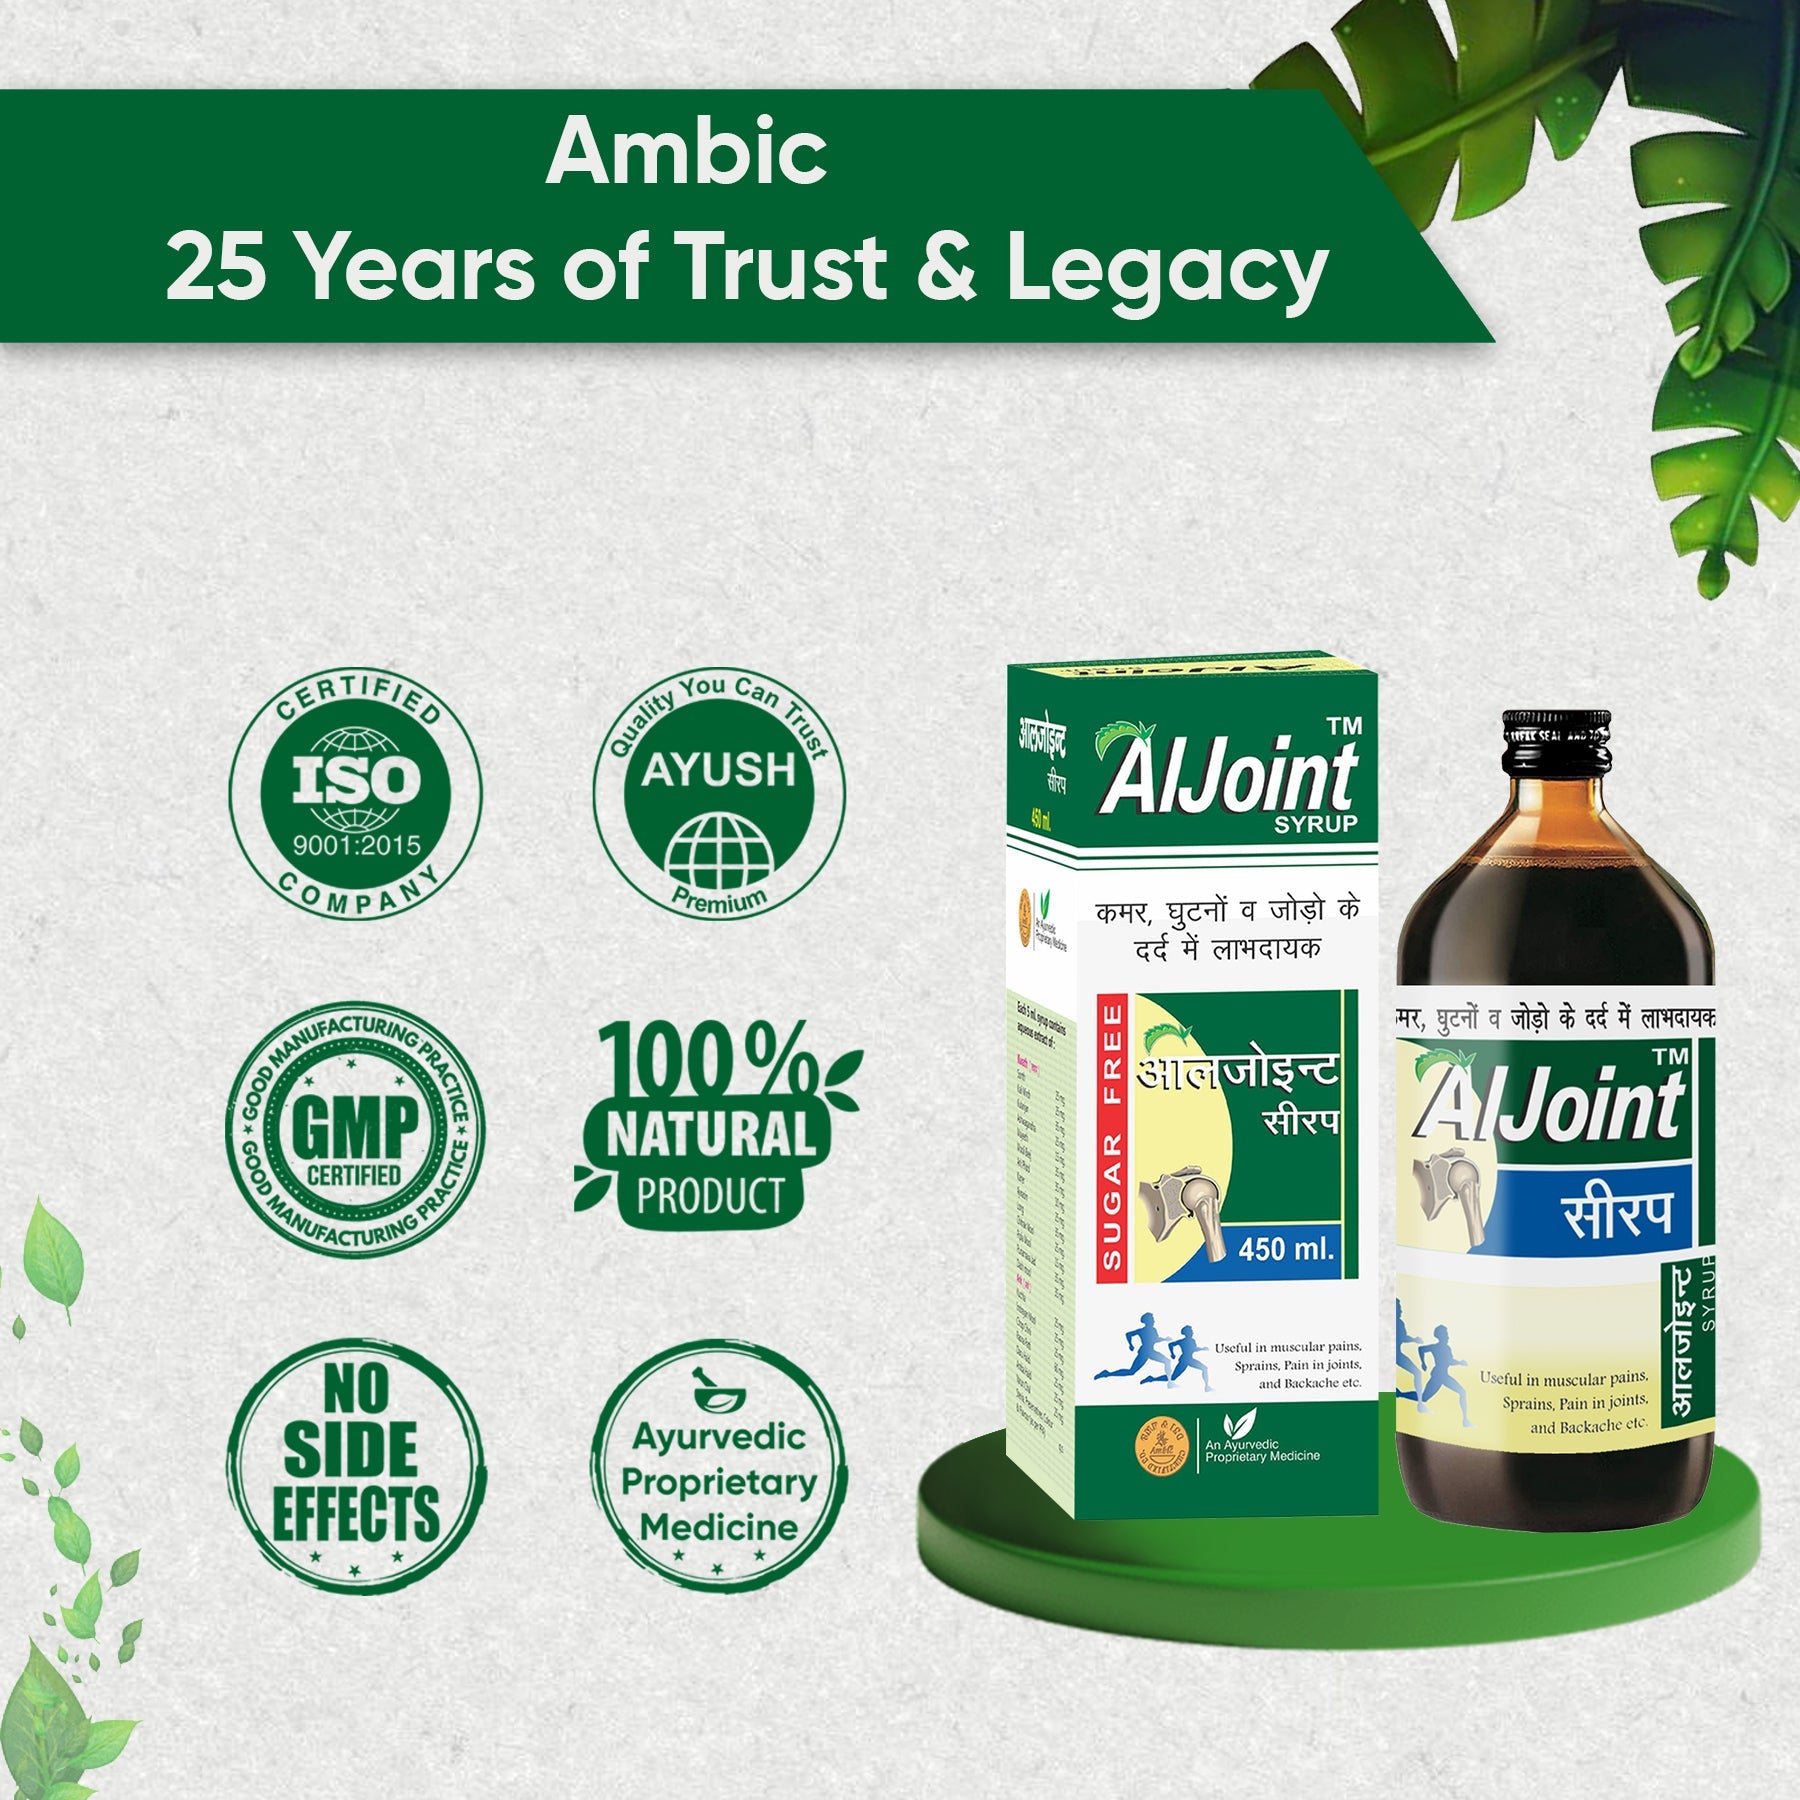 AMBIC Aljoint Pain Relief Syrup Ayurvedic Syrup for Joint Pain & Muscular Support 450ML